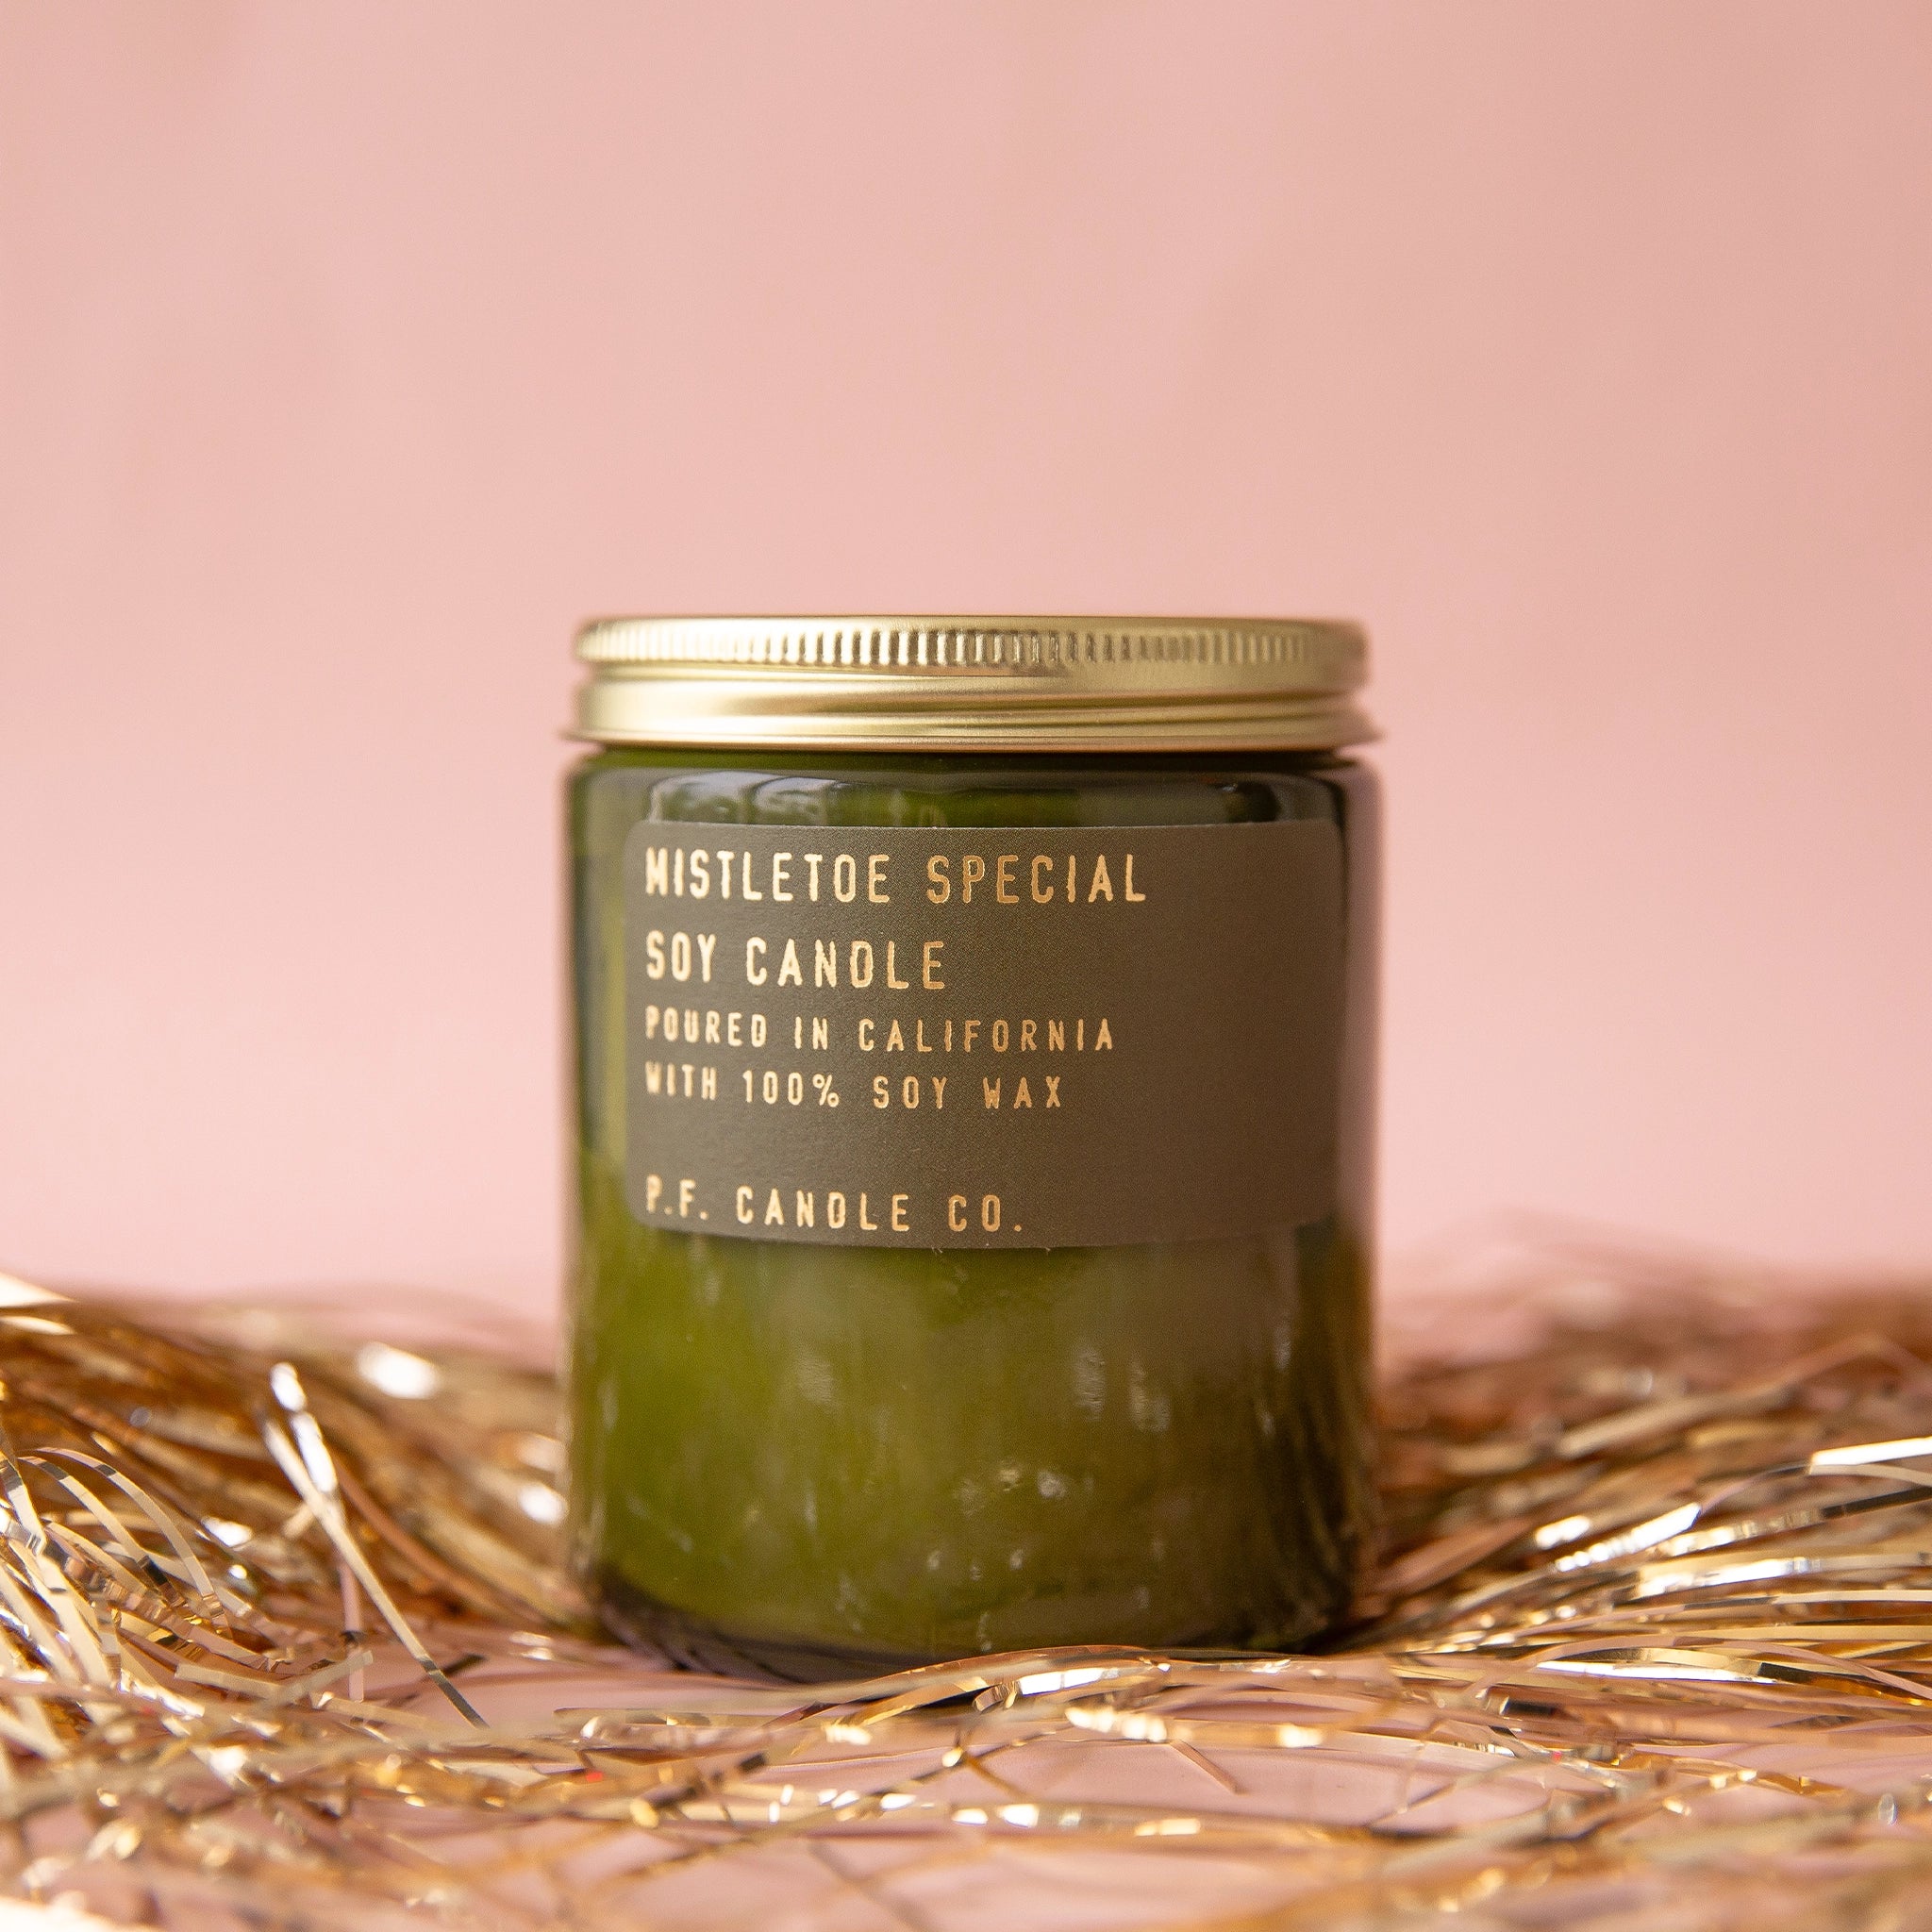 On a pink background is a green glass jarred candle with a gold lid and gold lettering that reads, "Mistletoe Special Soy Candle".